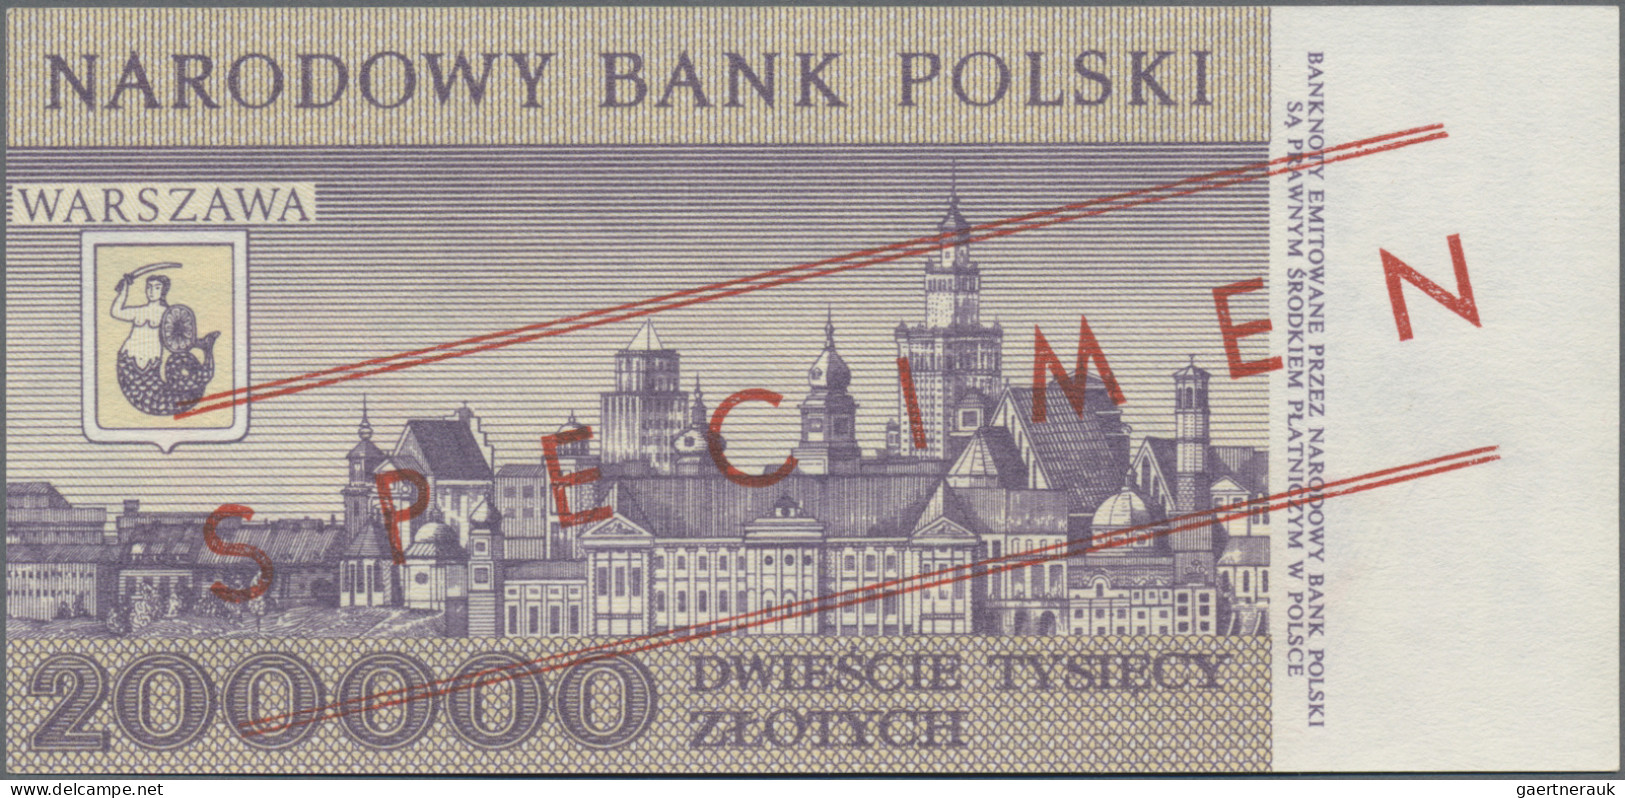 Poland - Bank Notes: Narodowy Bank Polski, Pair With 200.000 Zlotych 1989 And 20 - Poland